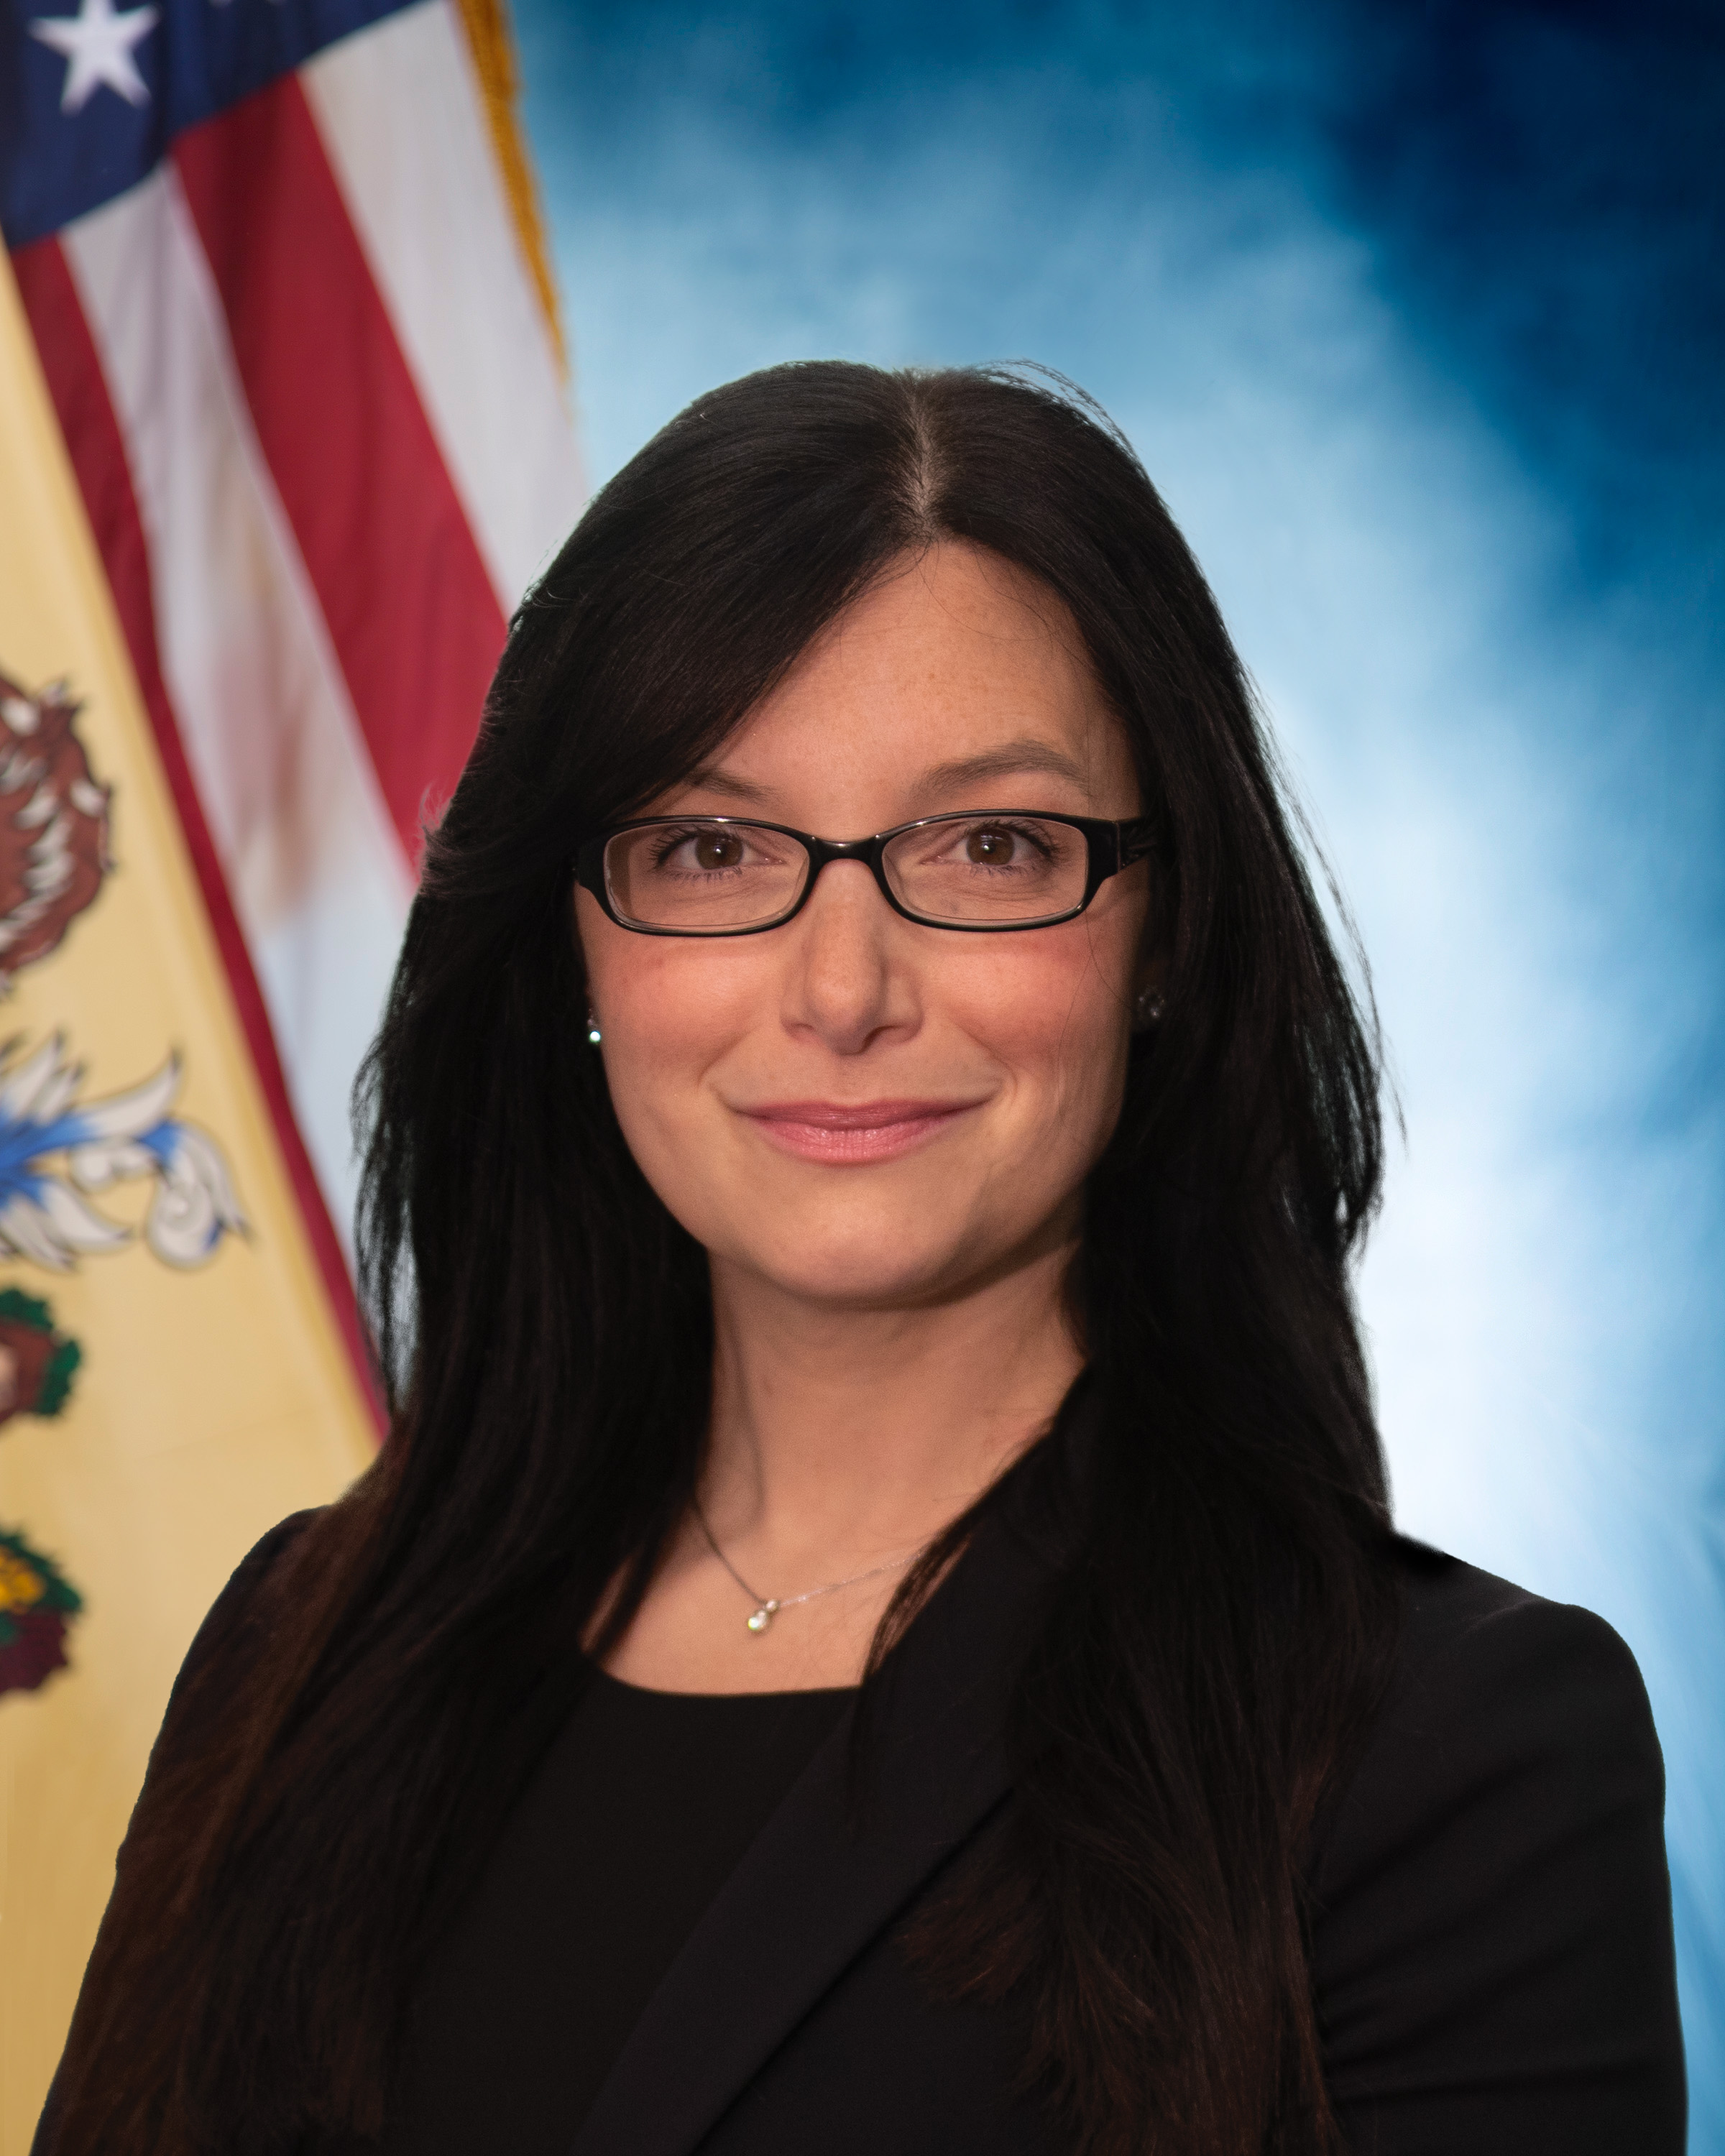 </p>
<h3 style="color:white;">Lyndsay V. Ruotolo</h3>
<h5 style="color:white;font-style:italic;">First Assistant Attorney General</h5>
<p>